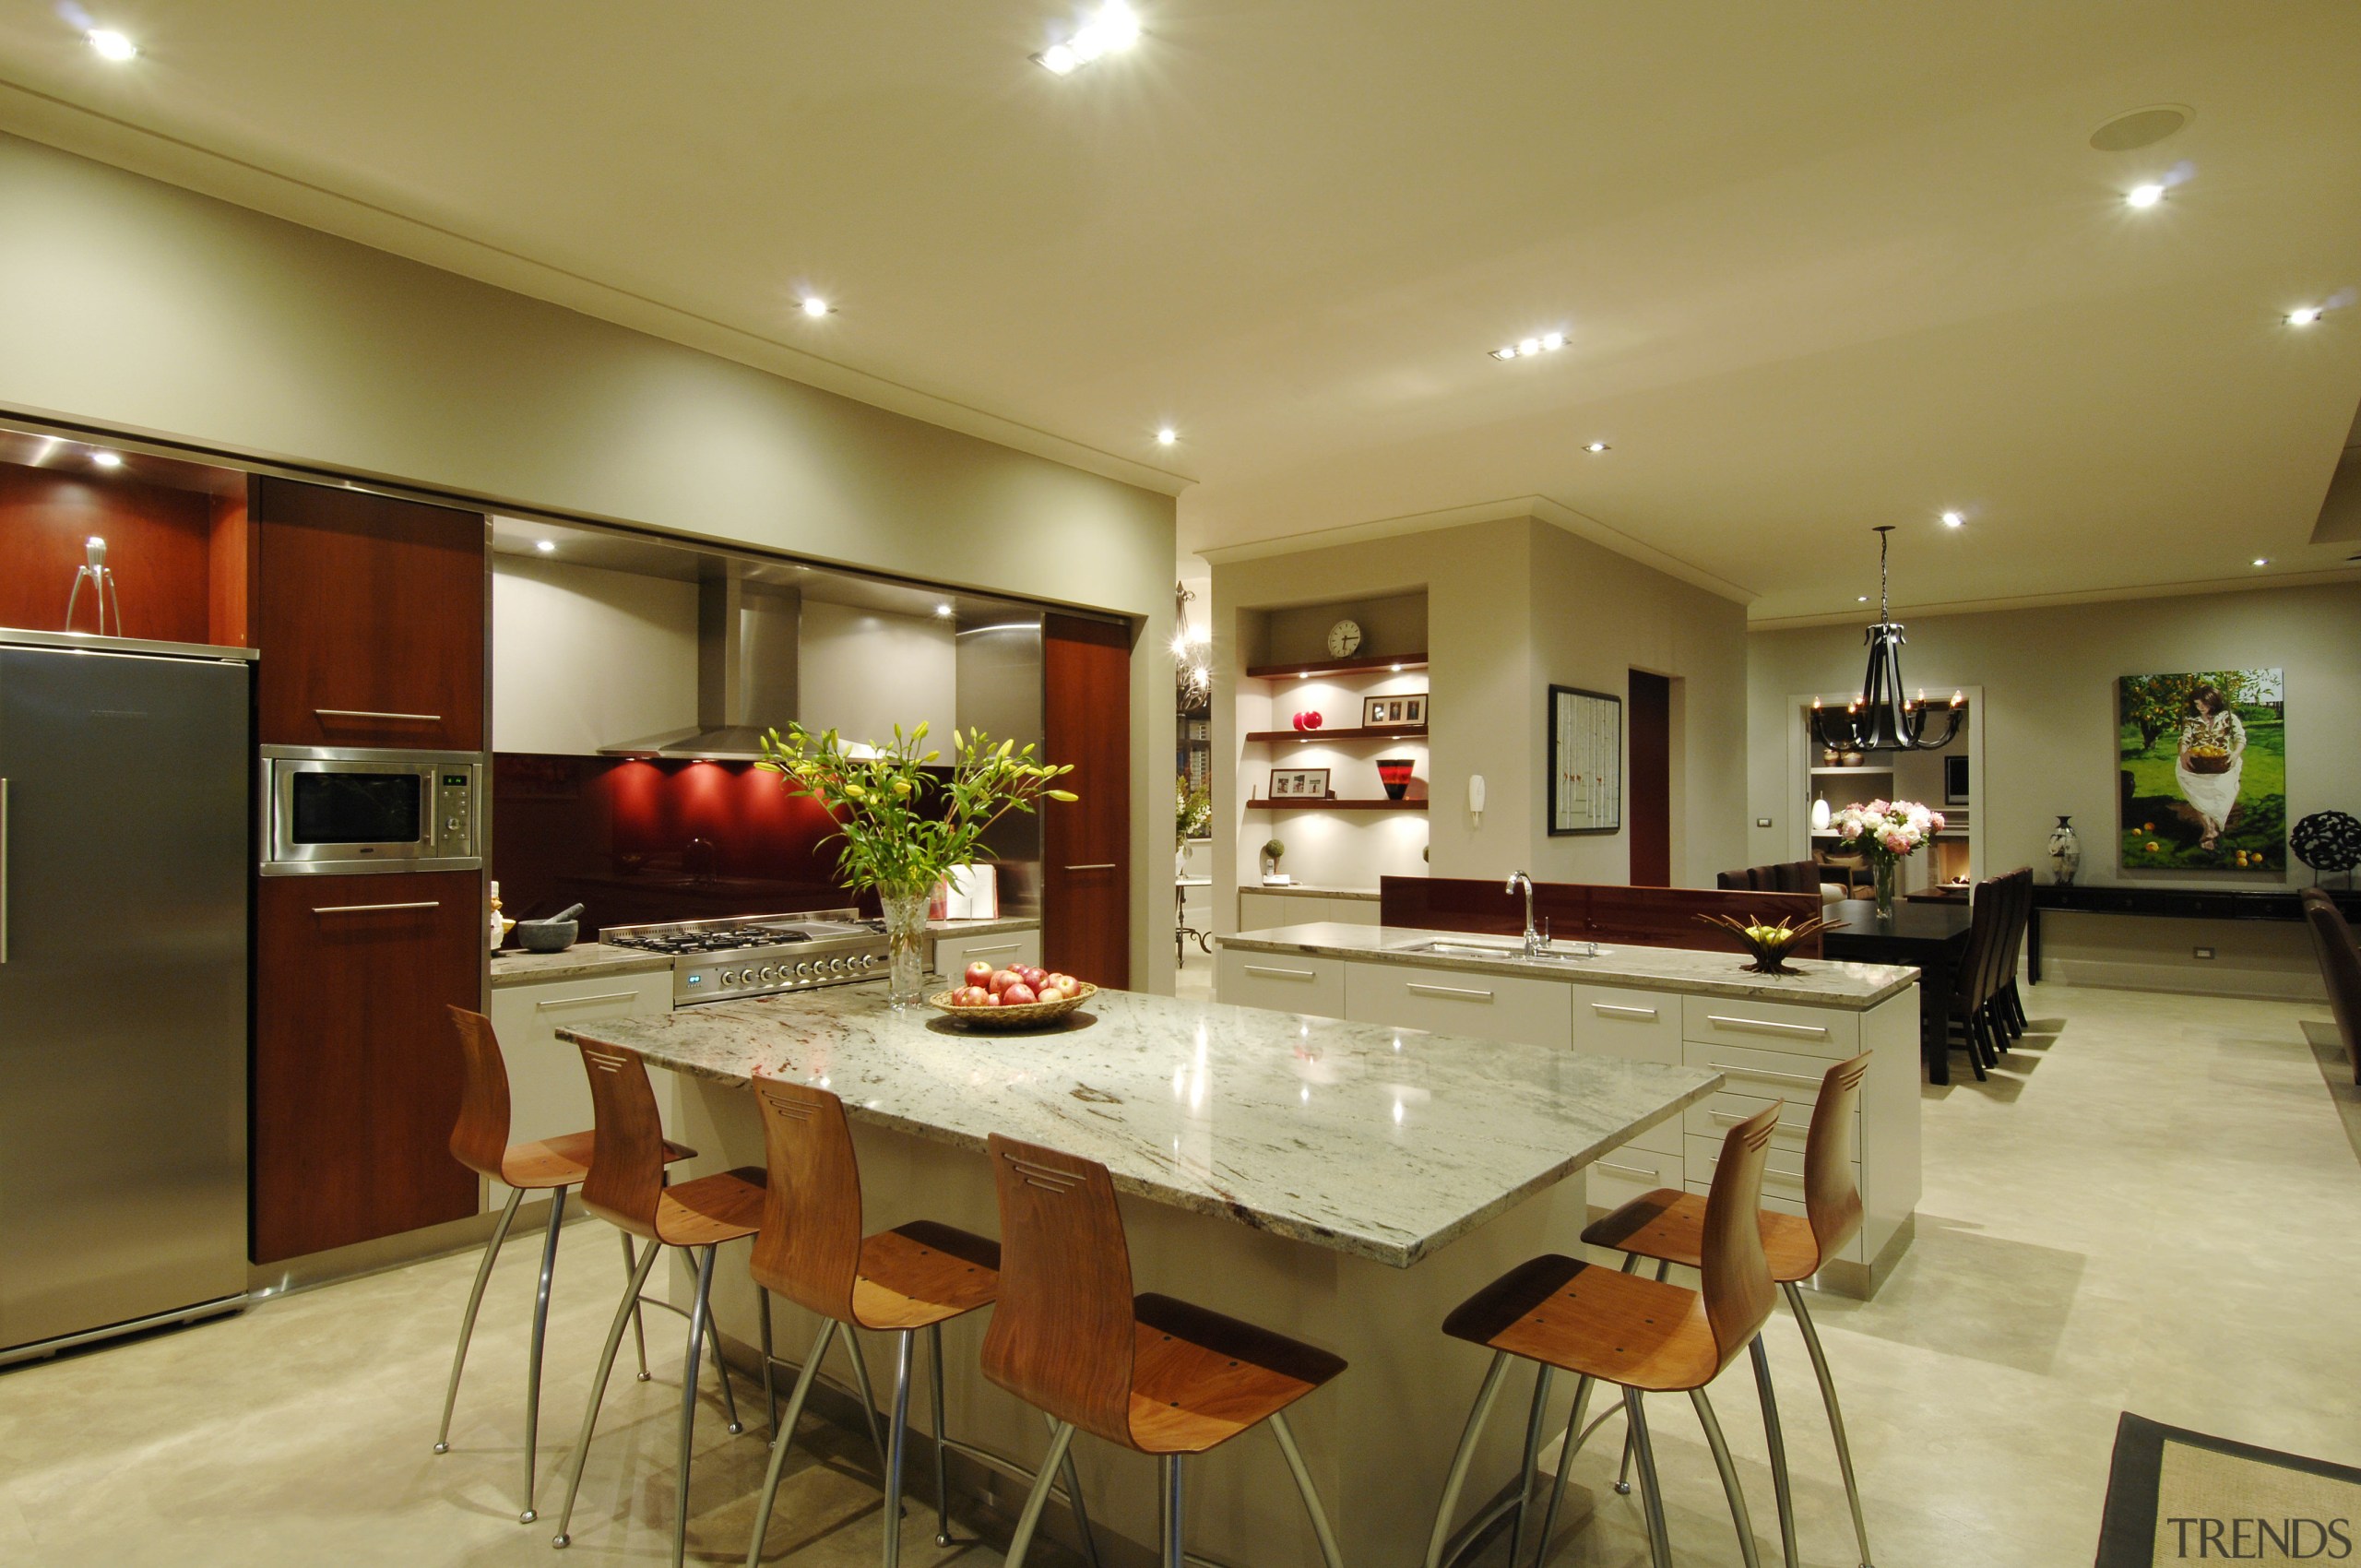 This house was designed by Mark Wilson of ceiling, countertop, interior design, kitchen, real estate, room, brown, orange